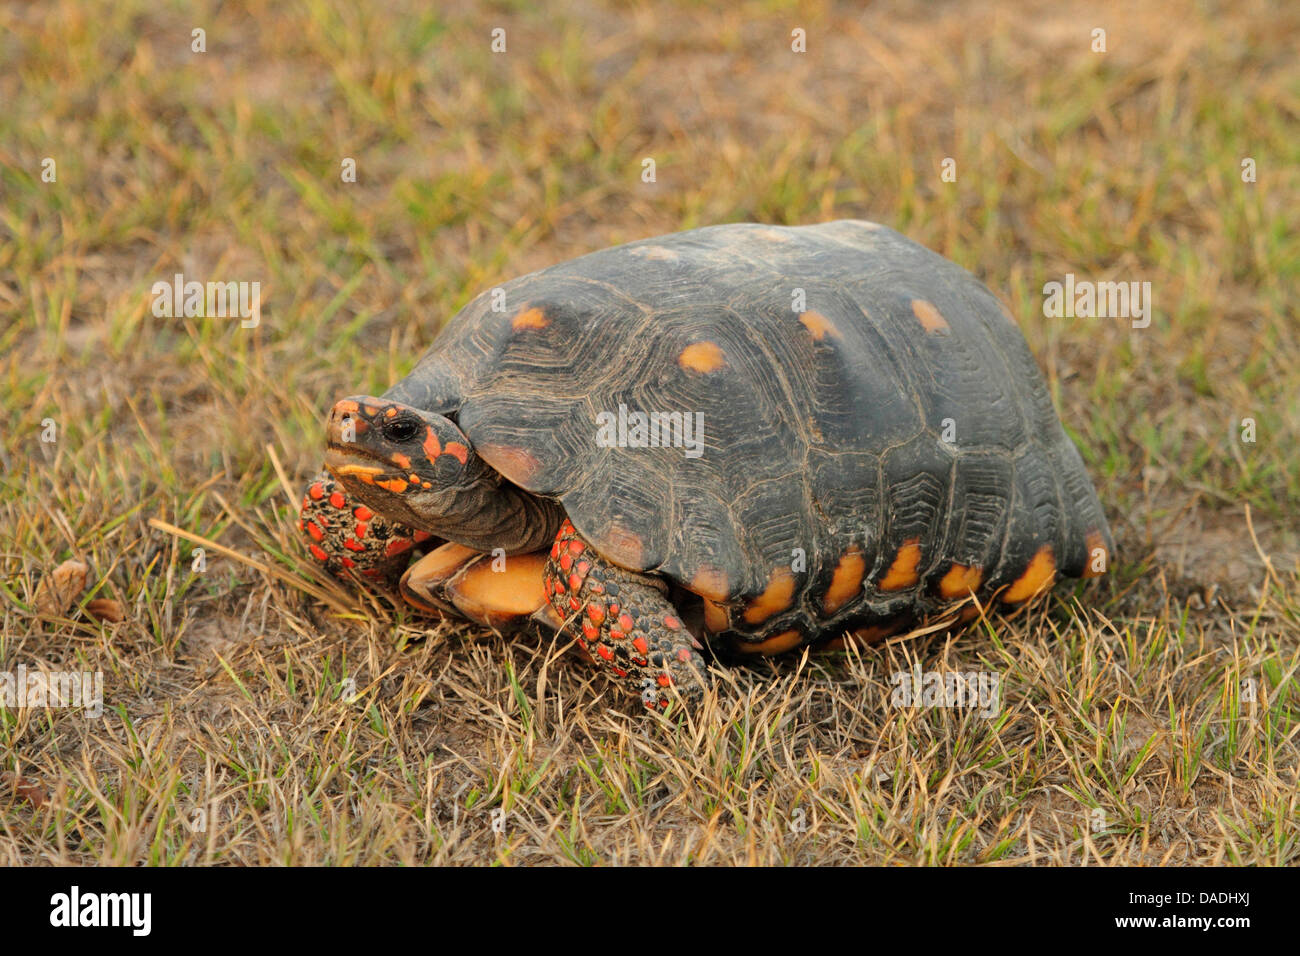 Red-footed tortoise, South American red-footed tortoise, Coal tortoise (Geochelone carbonaria, Testudo carbonaria, Chelonoidis carbonaria), in evening light, Brazil, Mato Grosso, Pantanal Stock Photo